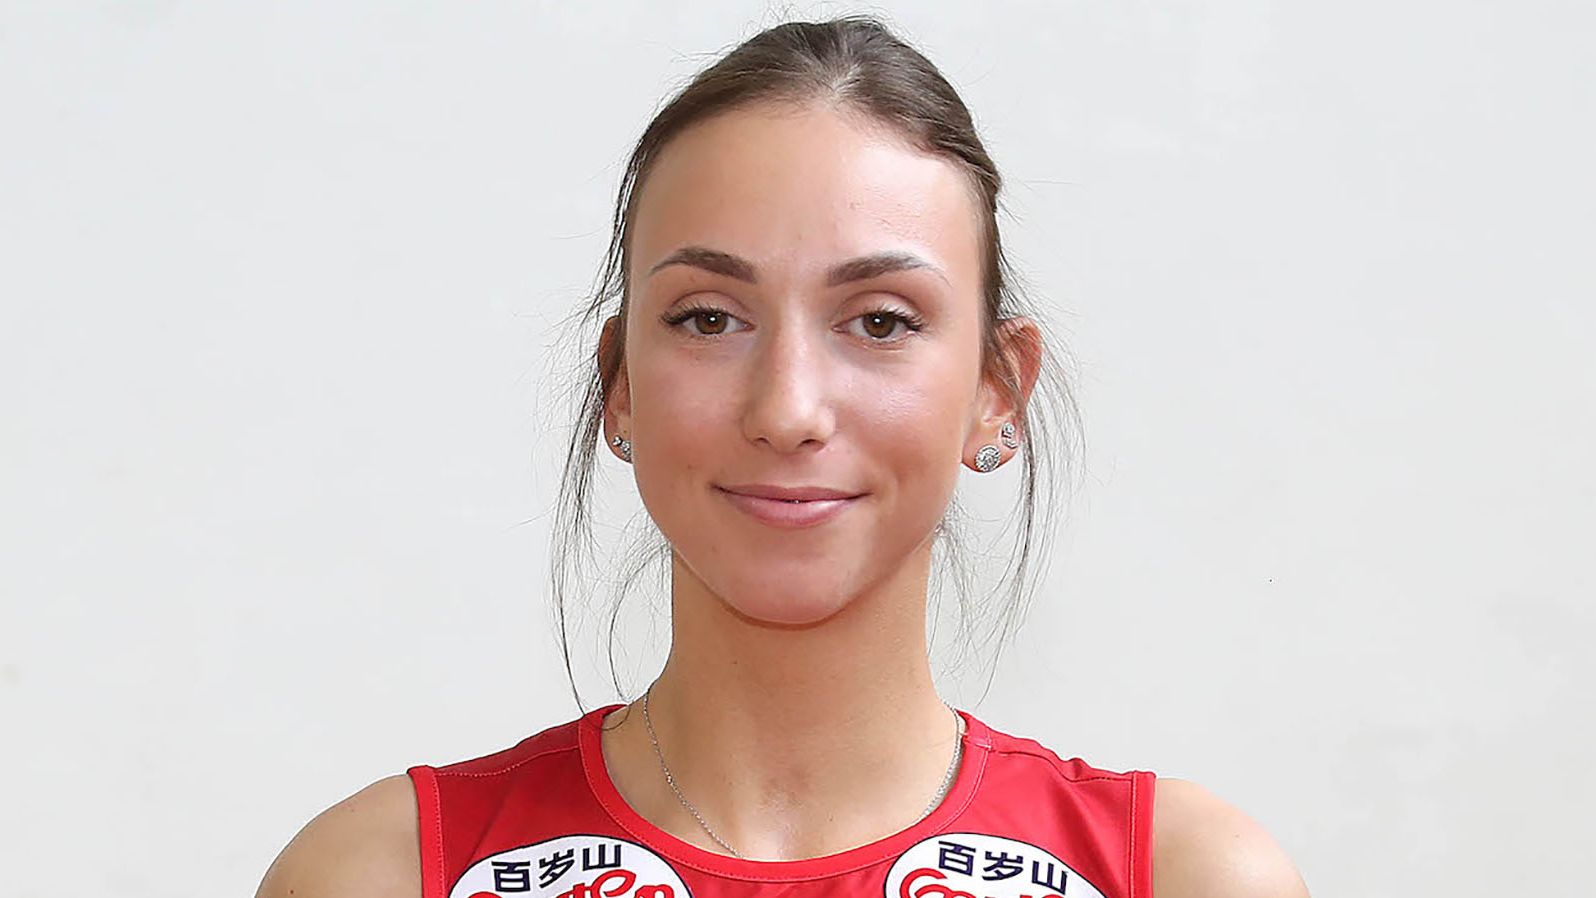 Serbian volleyball player Sanja Djurdjevic violated the sport's disciplinary rules on June 1, according to the FIVB Disciplinary Panel Sub-Committee.